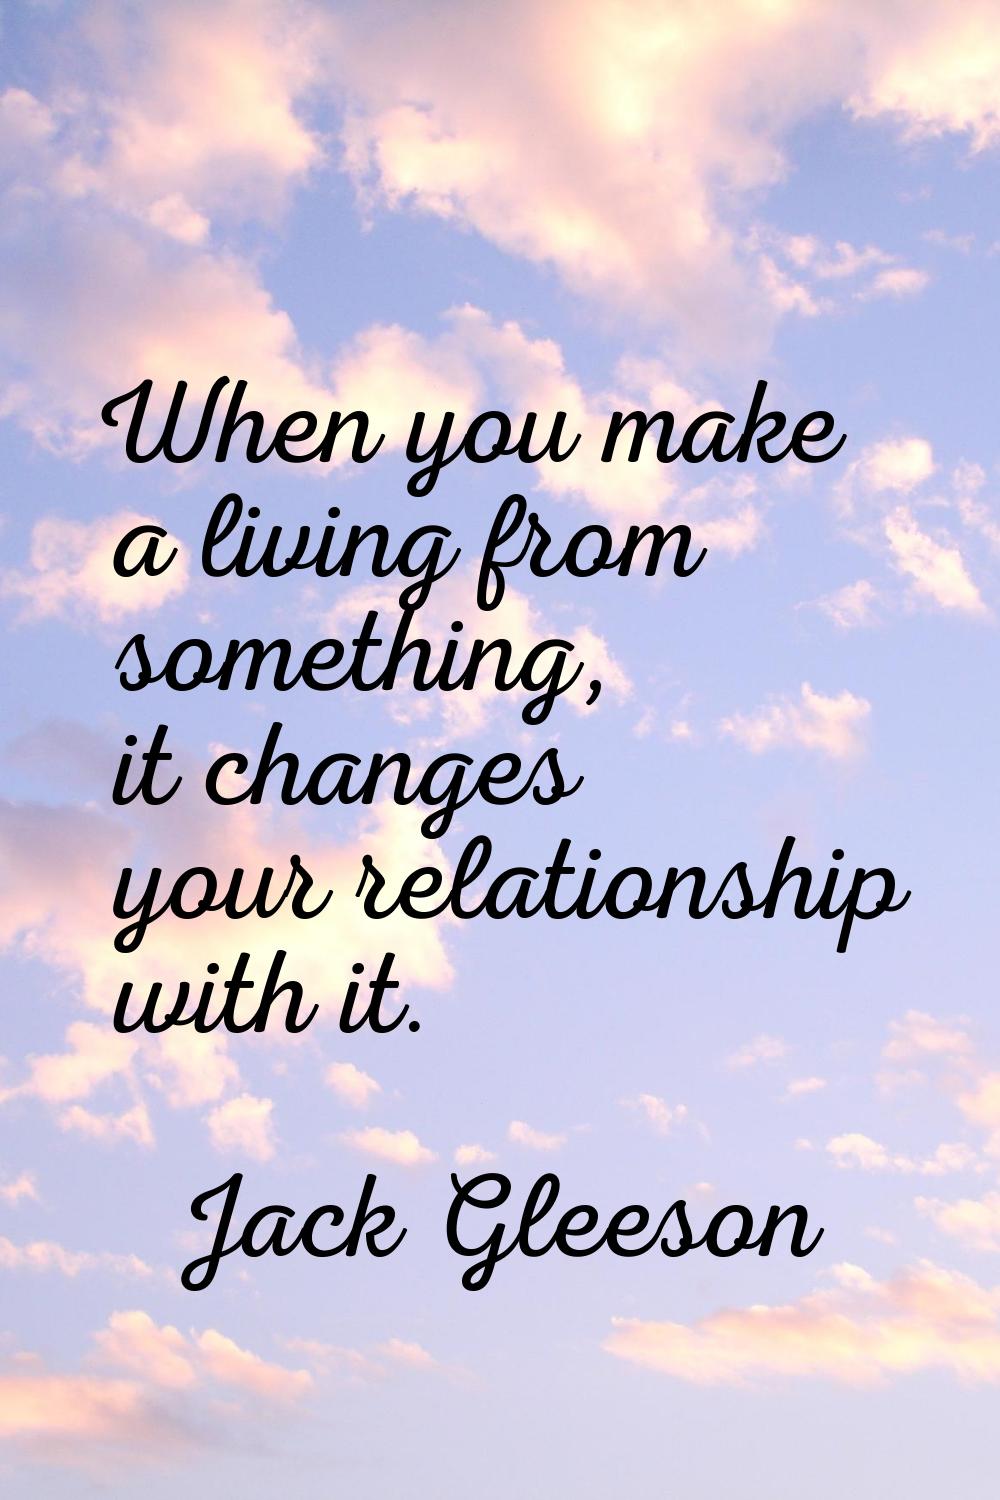 When you make a living from something, it changes your relationship with it.